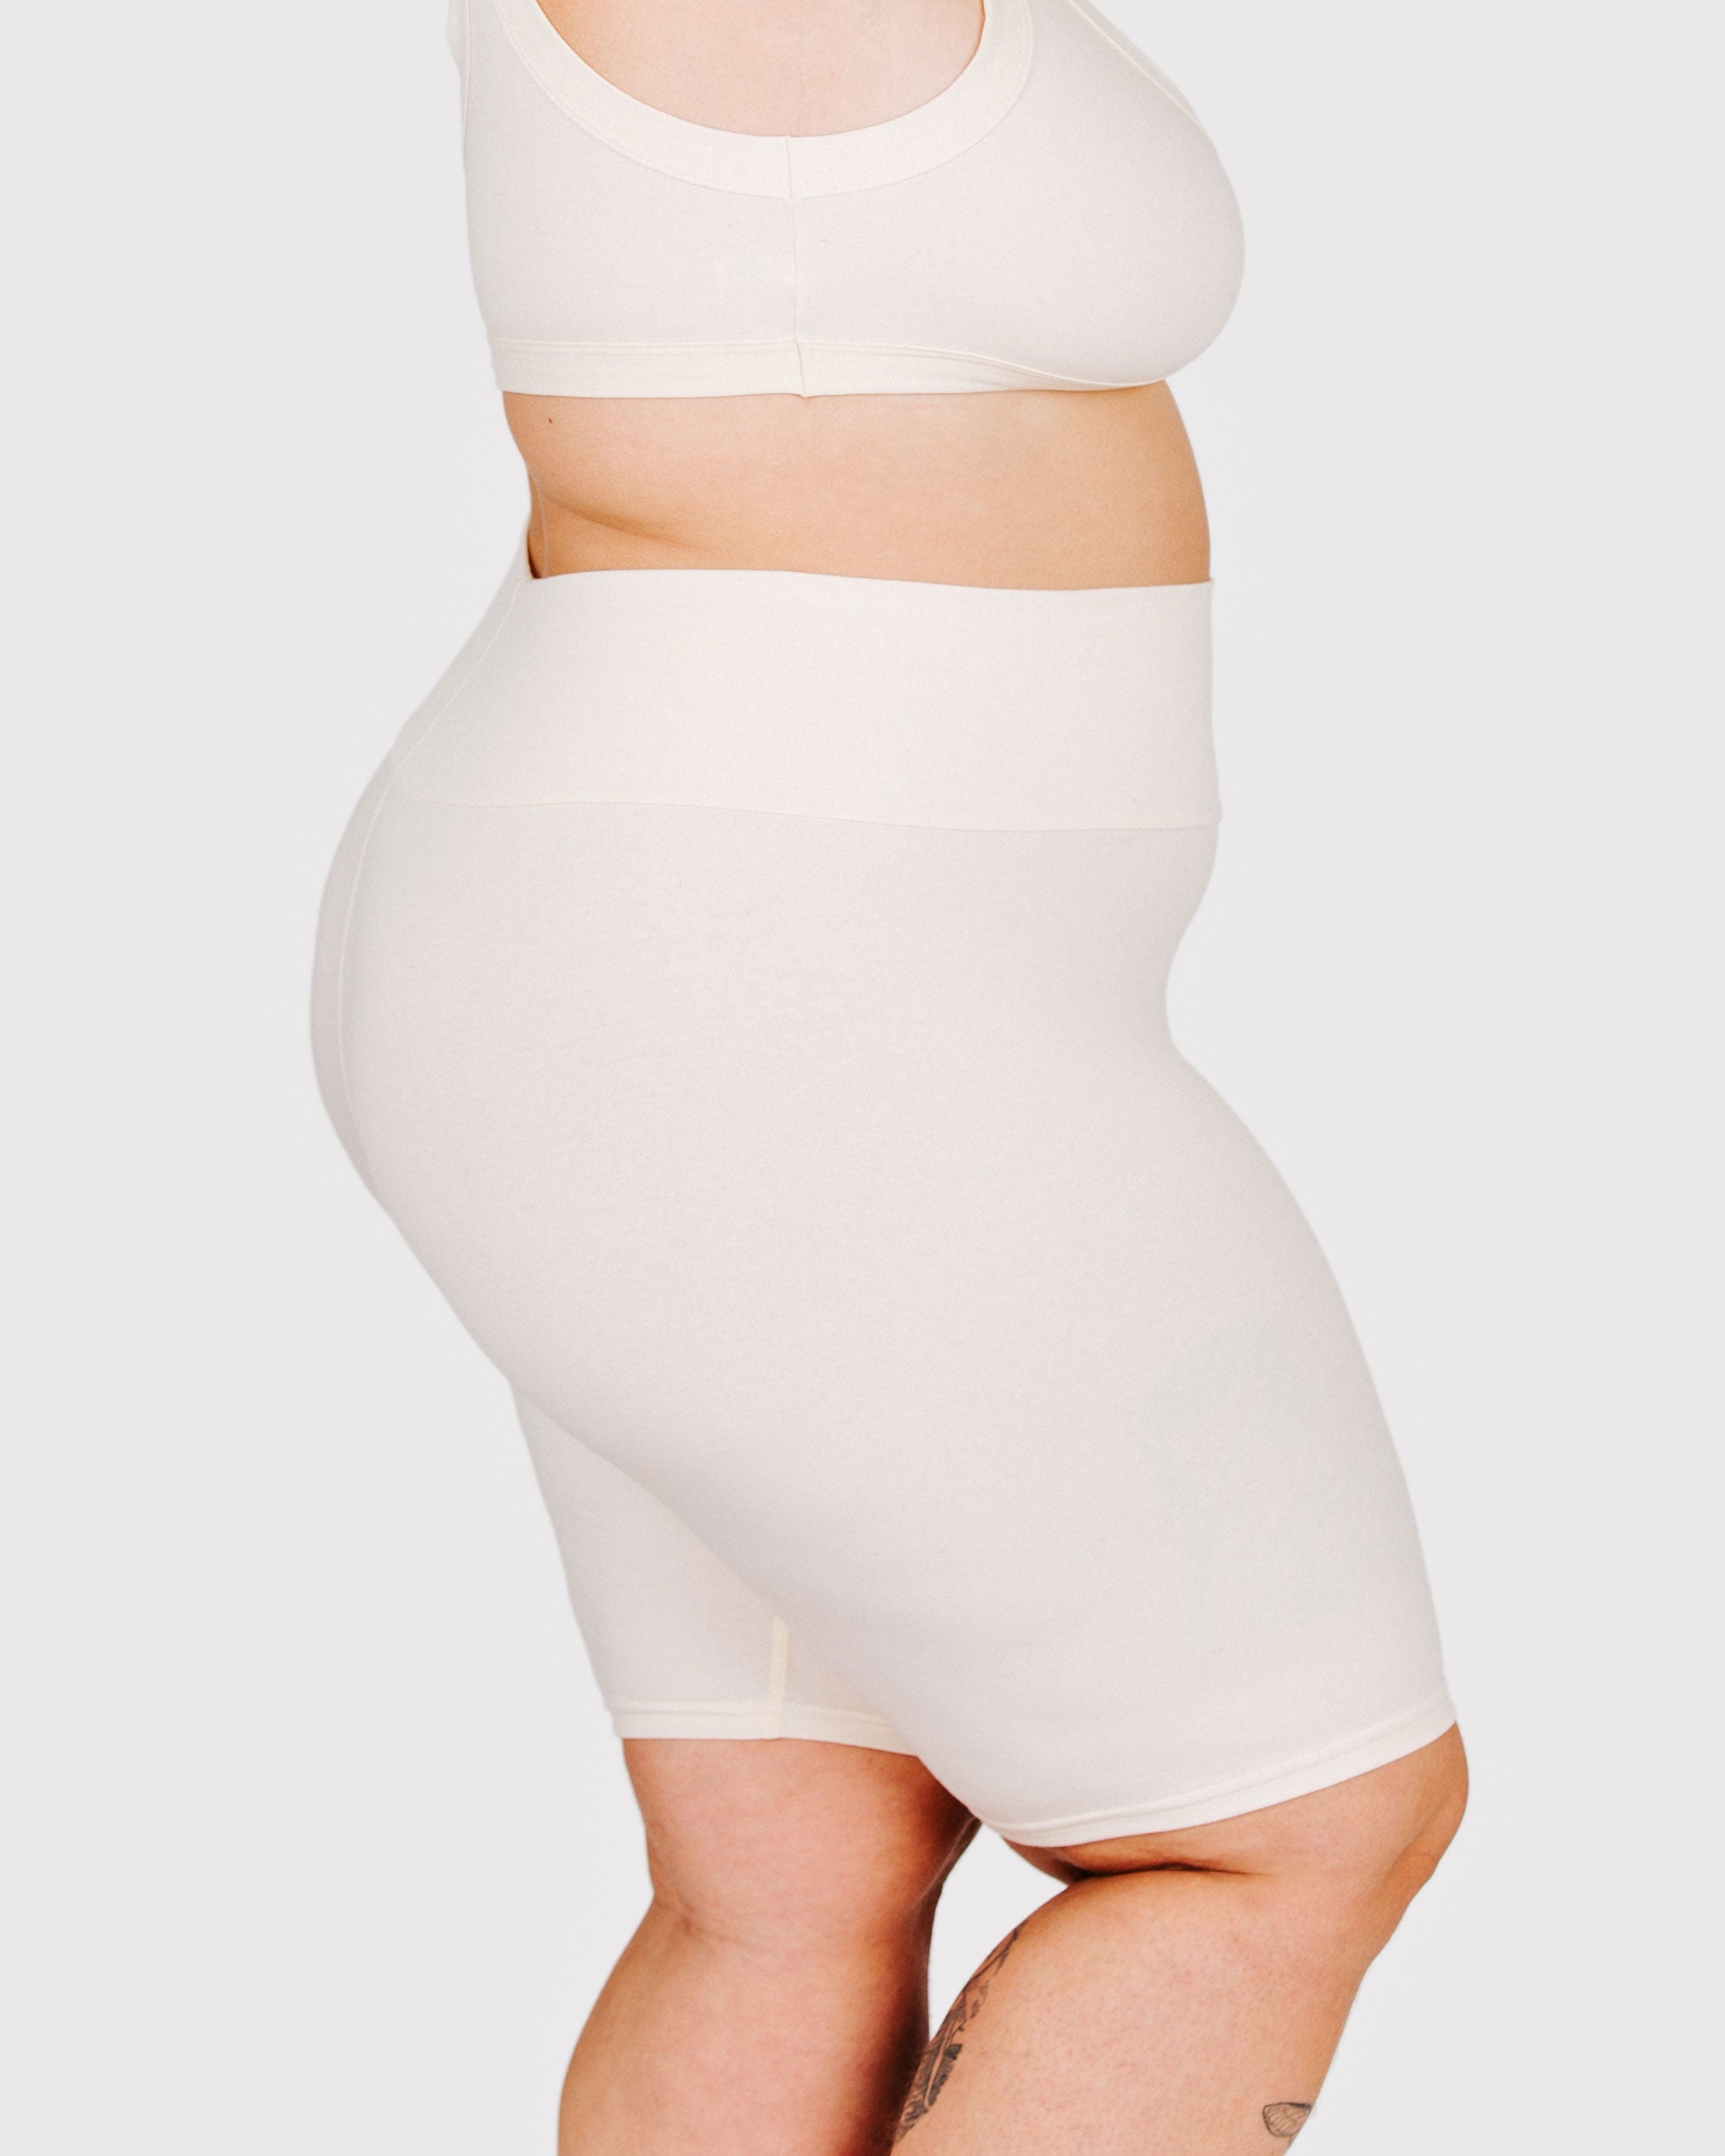 Fit photo from the side of Thunderpants organic cotton Bike Shorts in off-white on a model.